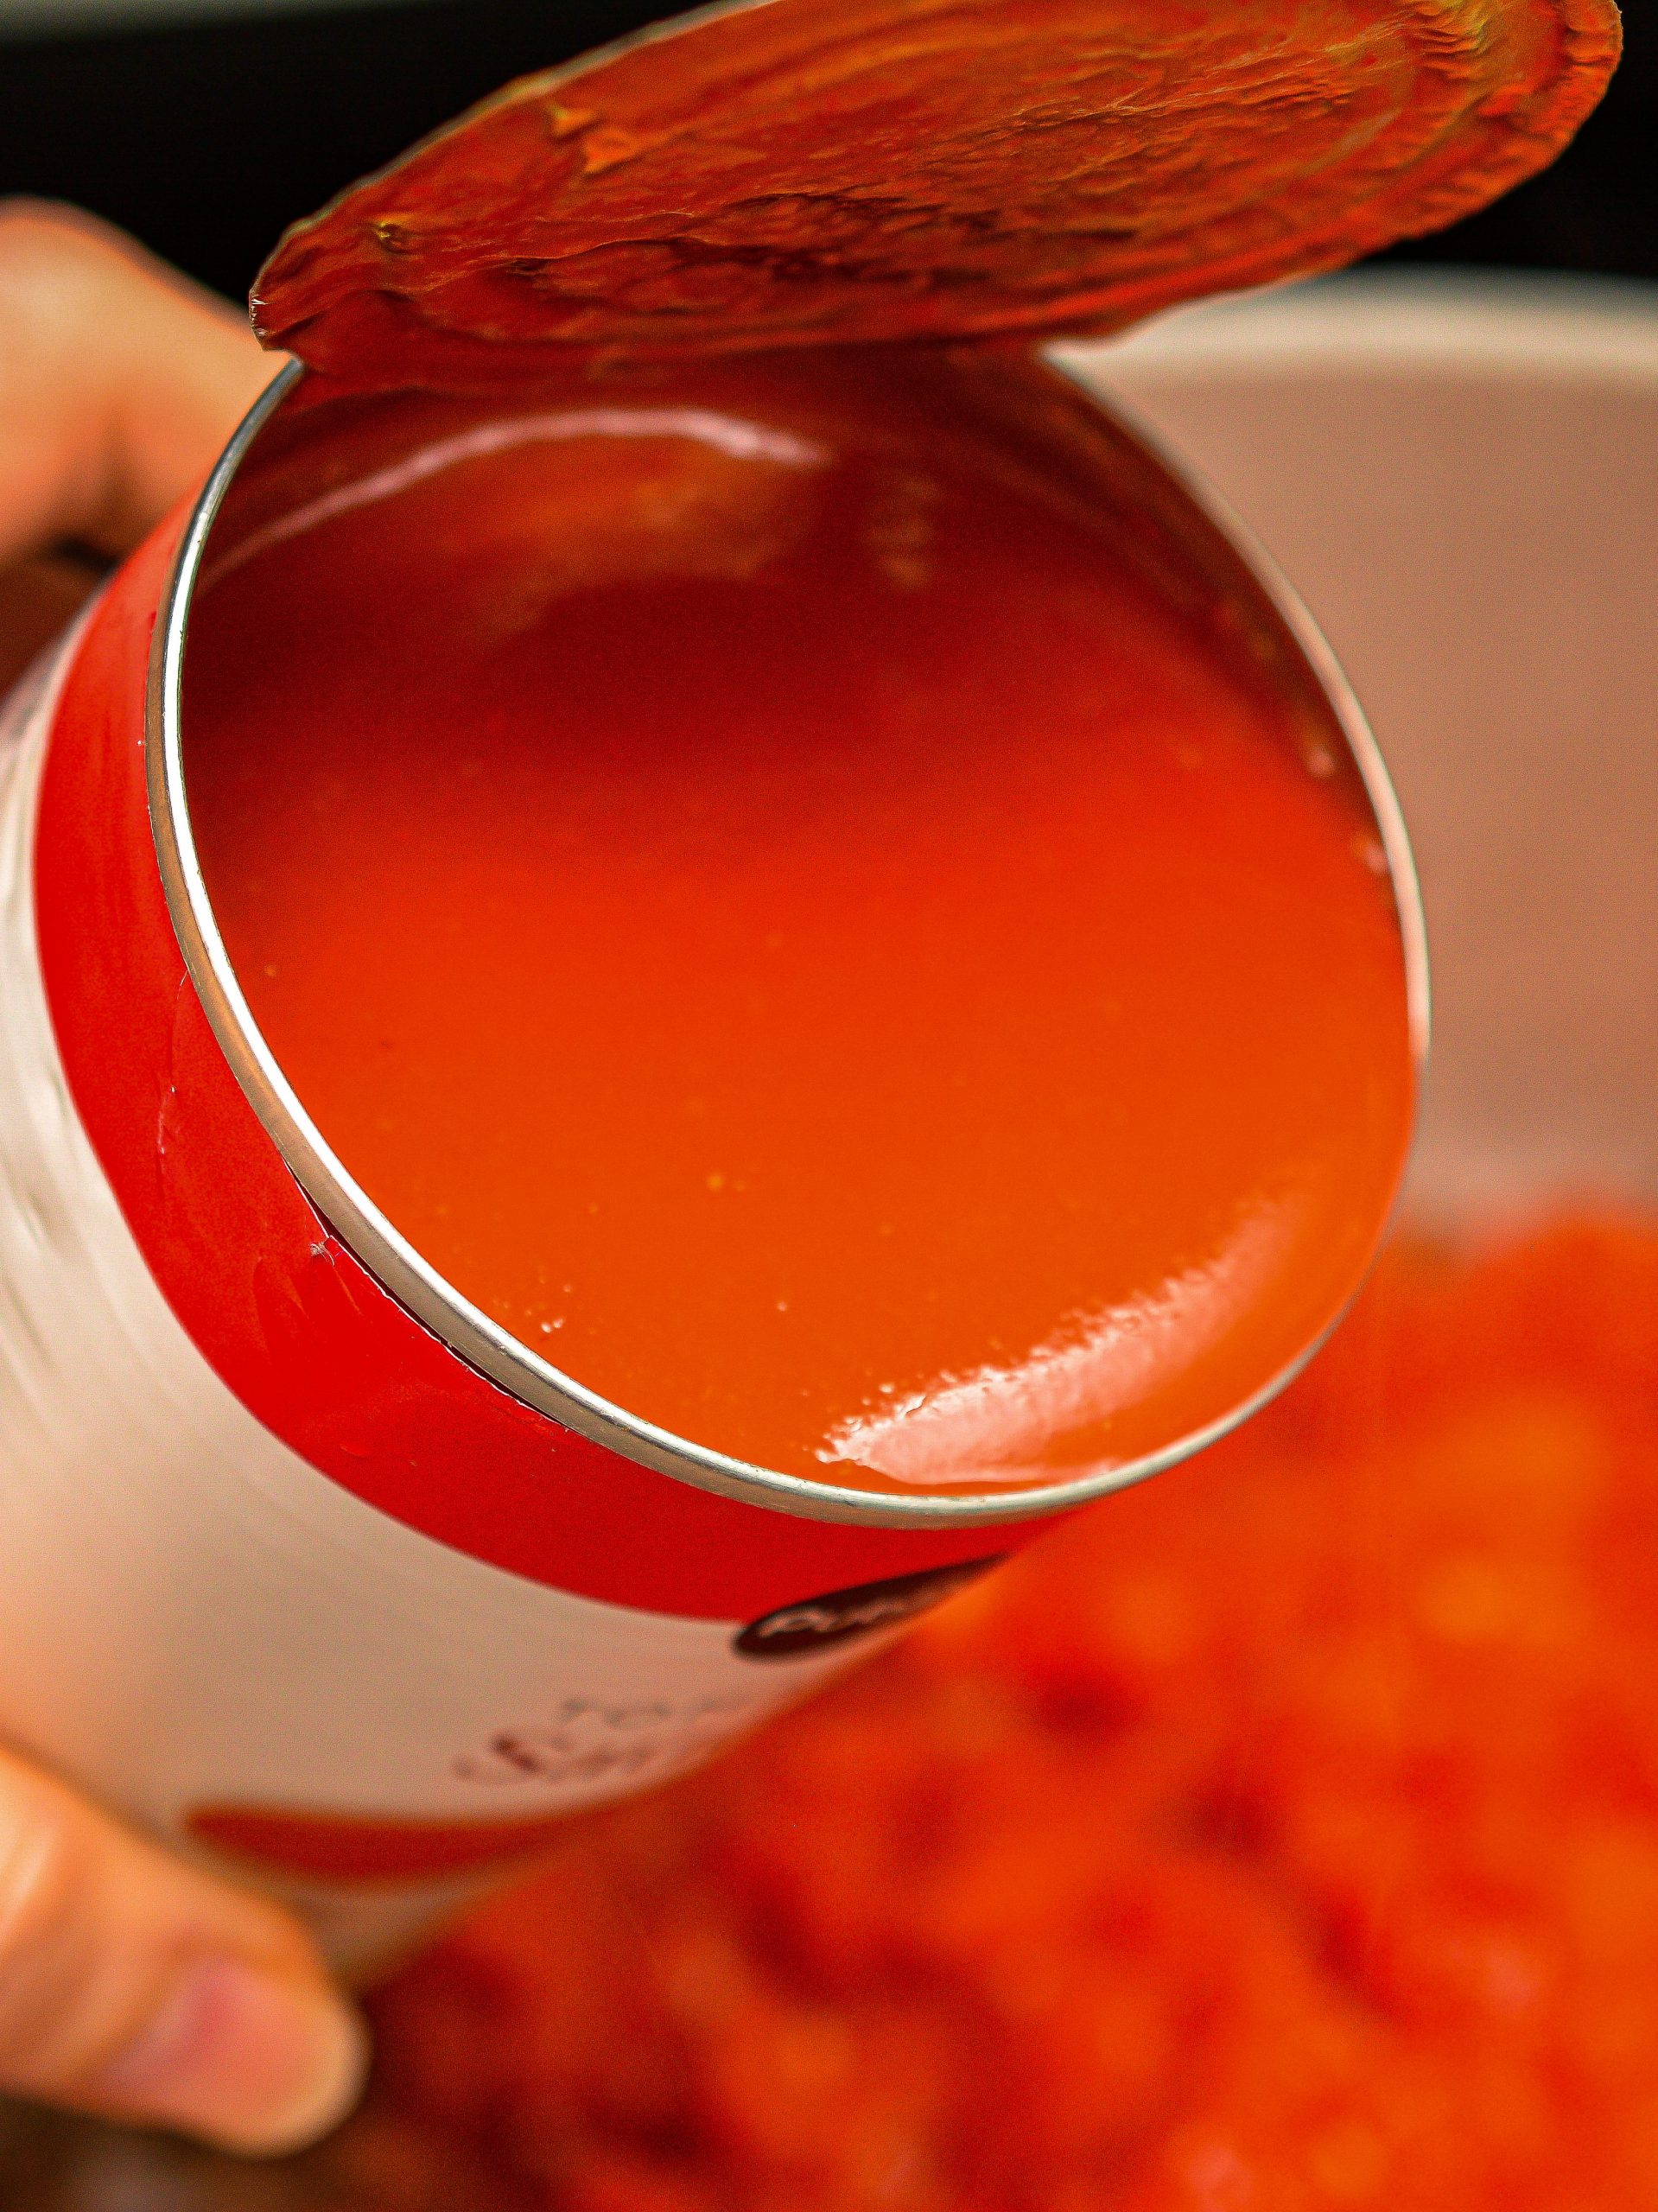 Mix the diced tomatoes, and tomato sauce into the saucepan.